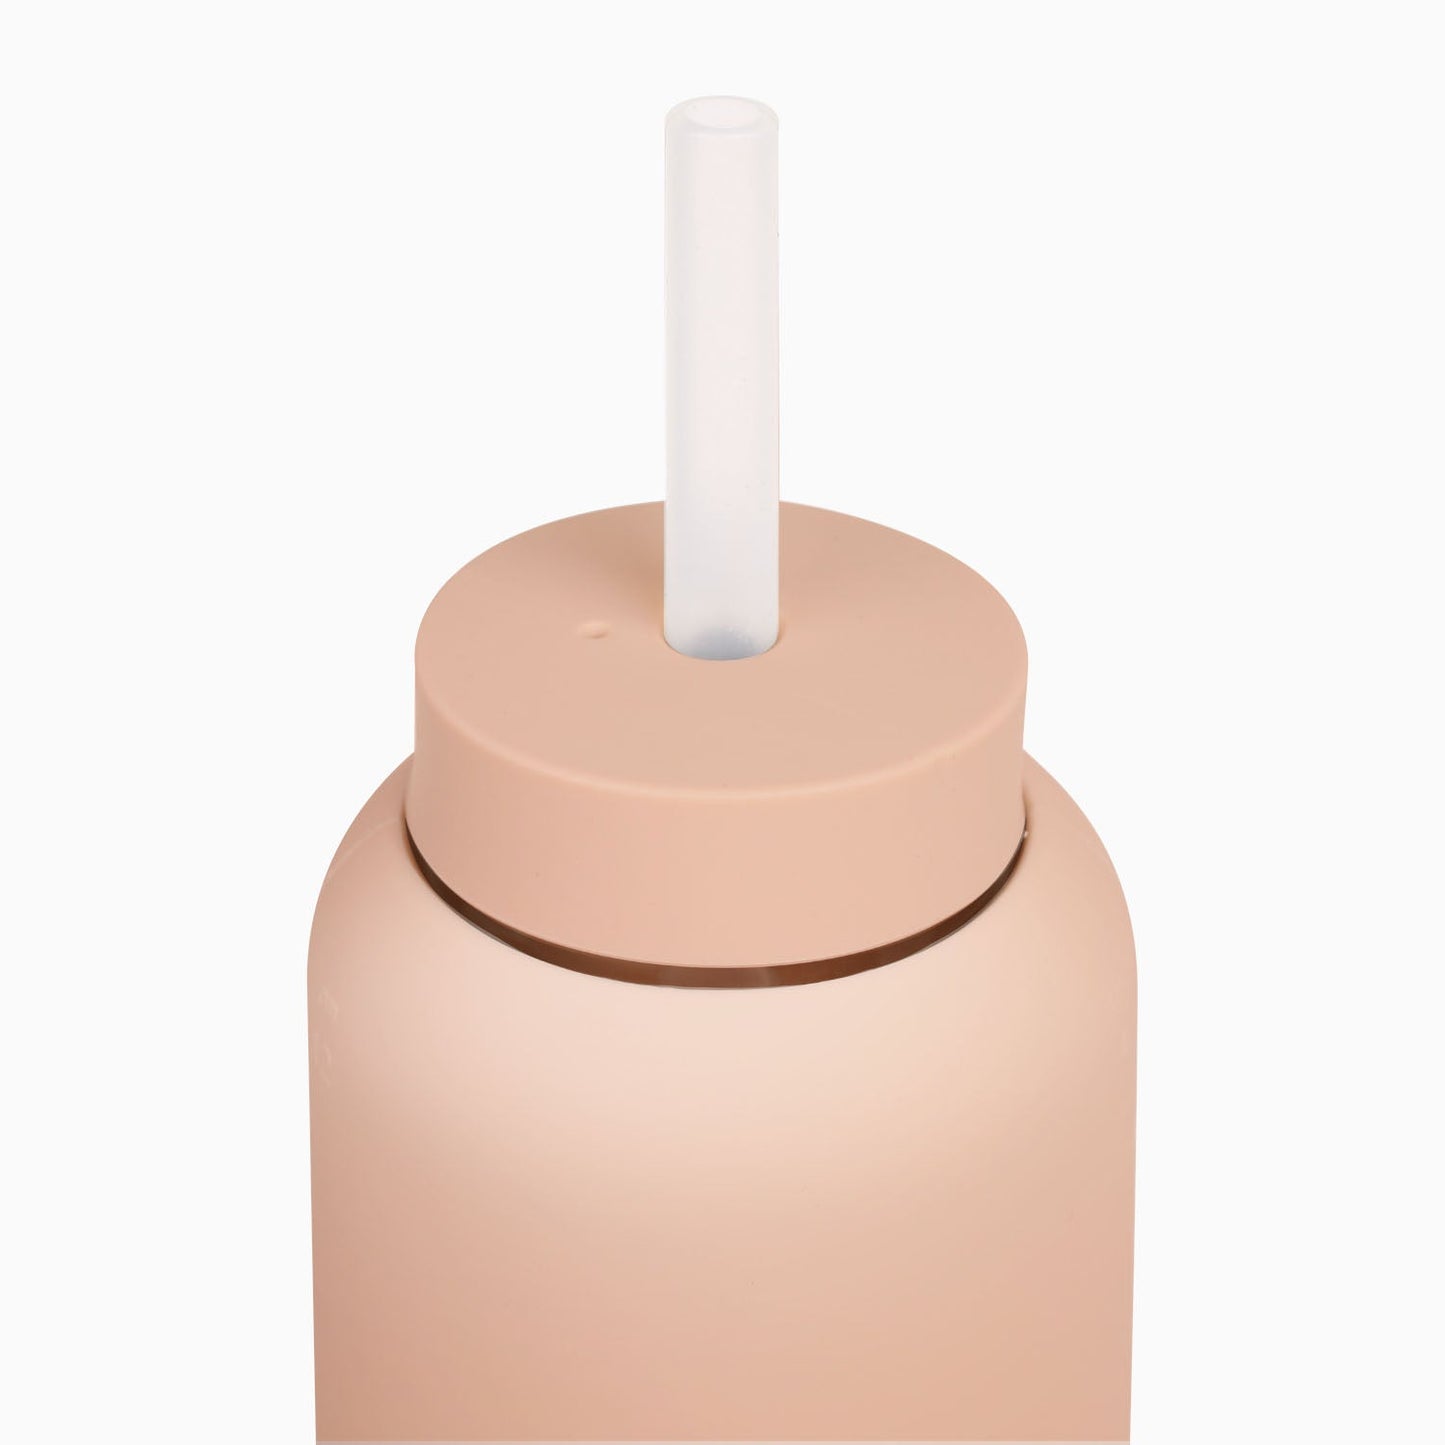 A reusable silicone straw & cap for clean, easy drinking, made to pair with the Hydration Tracking Water Bottle. Made from the purest food-grade silicone. Available at Thread Spun in Encinitas, Ca.